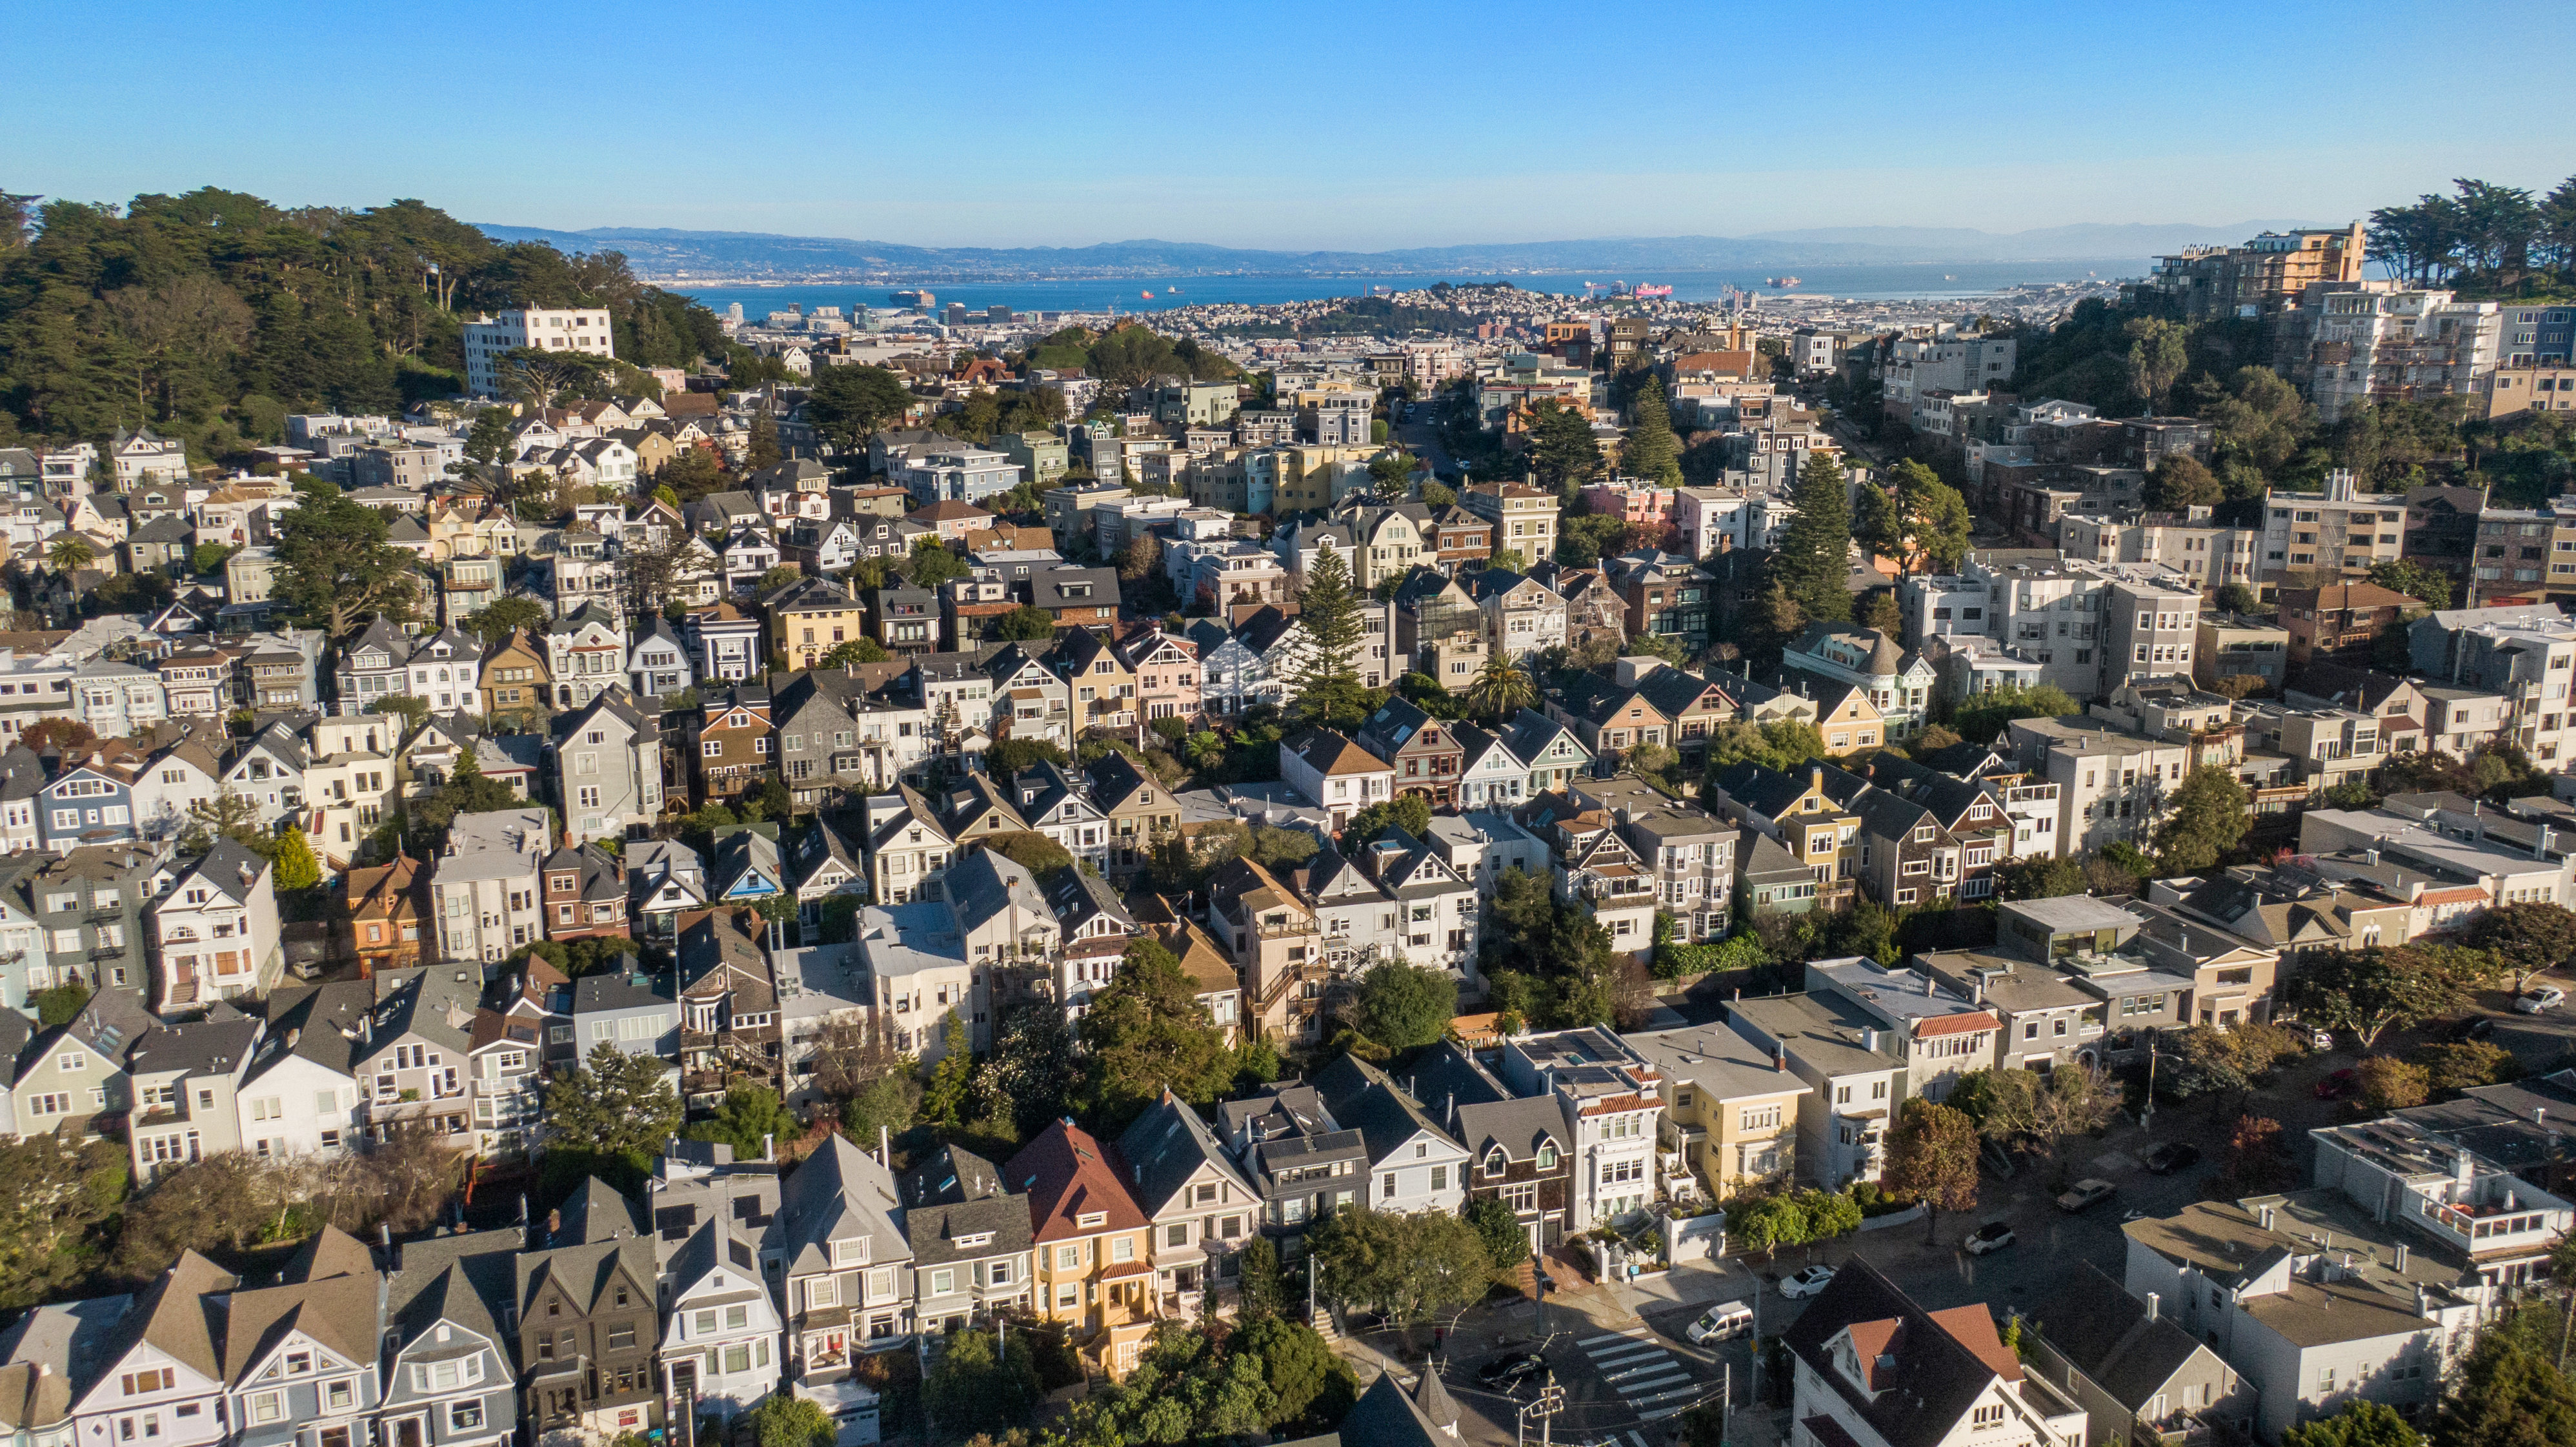 Property Photo: Aerial view, showing proximity to San Francisco Bay